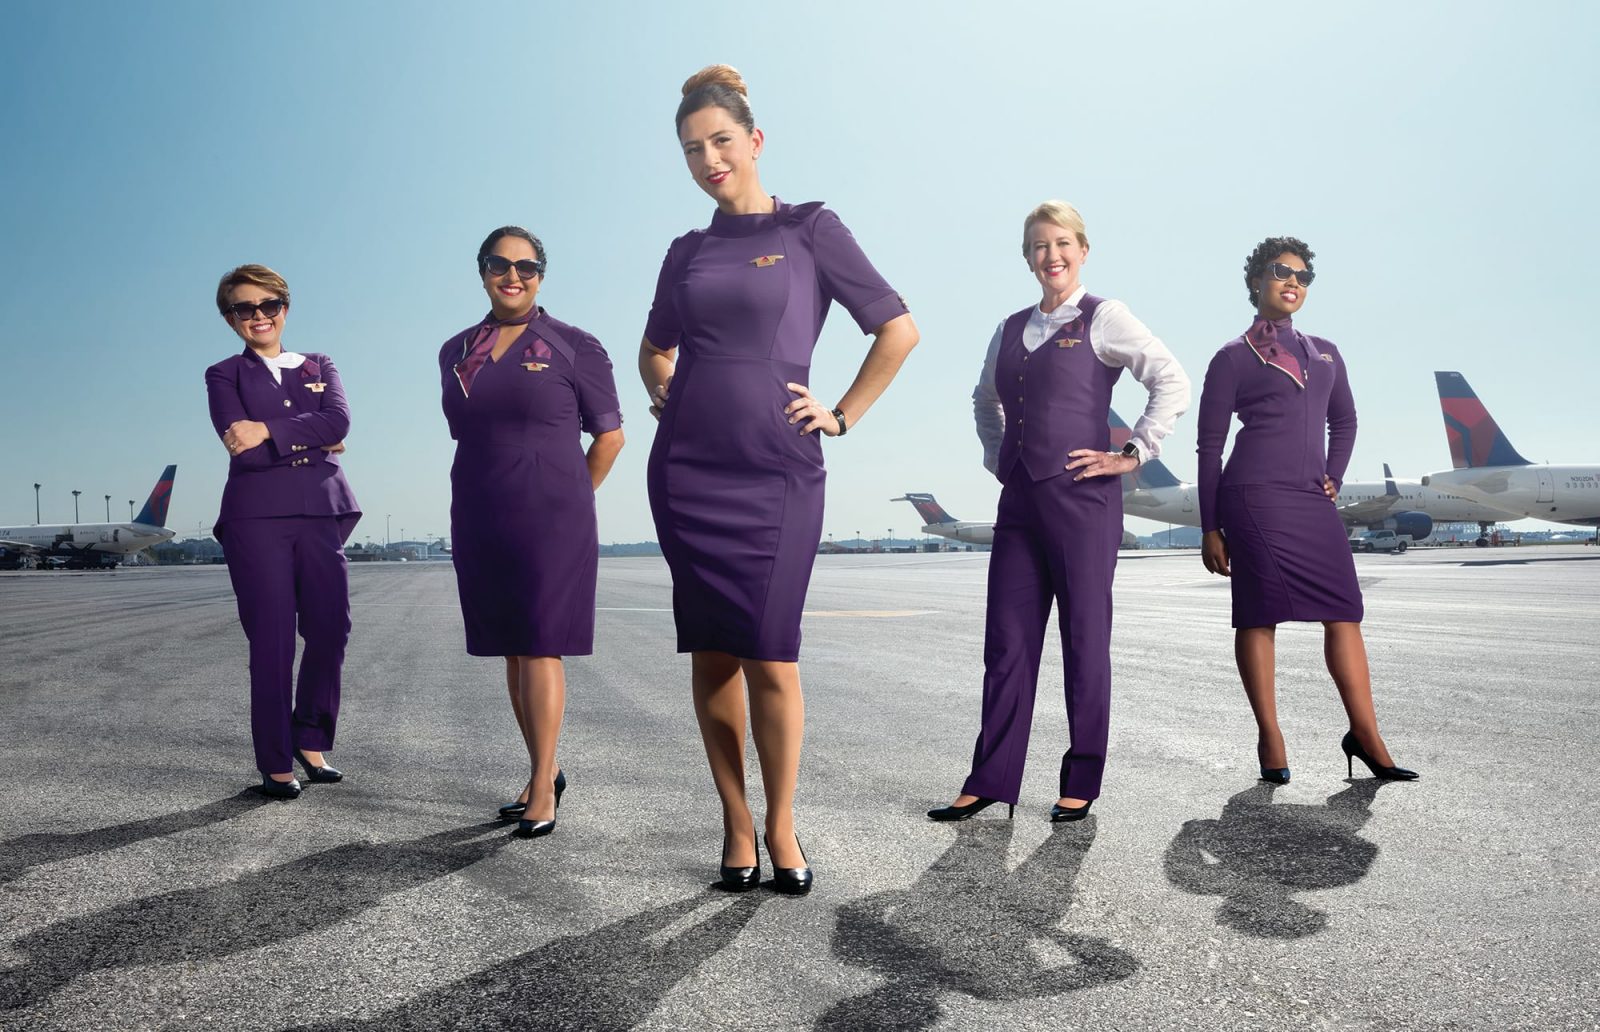 Flight Attendant uniforms and how they have changed over the years